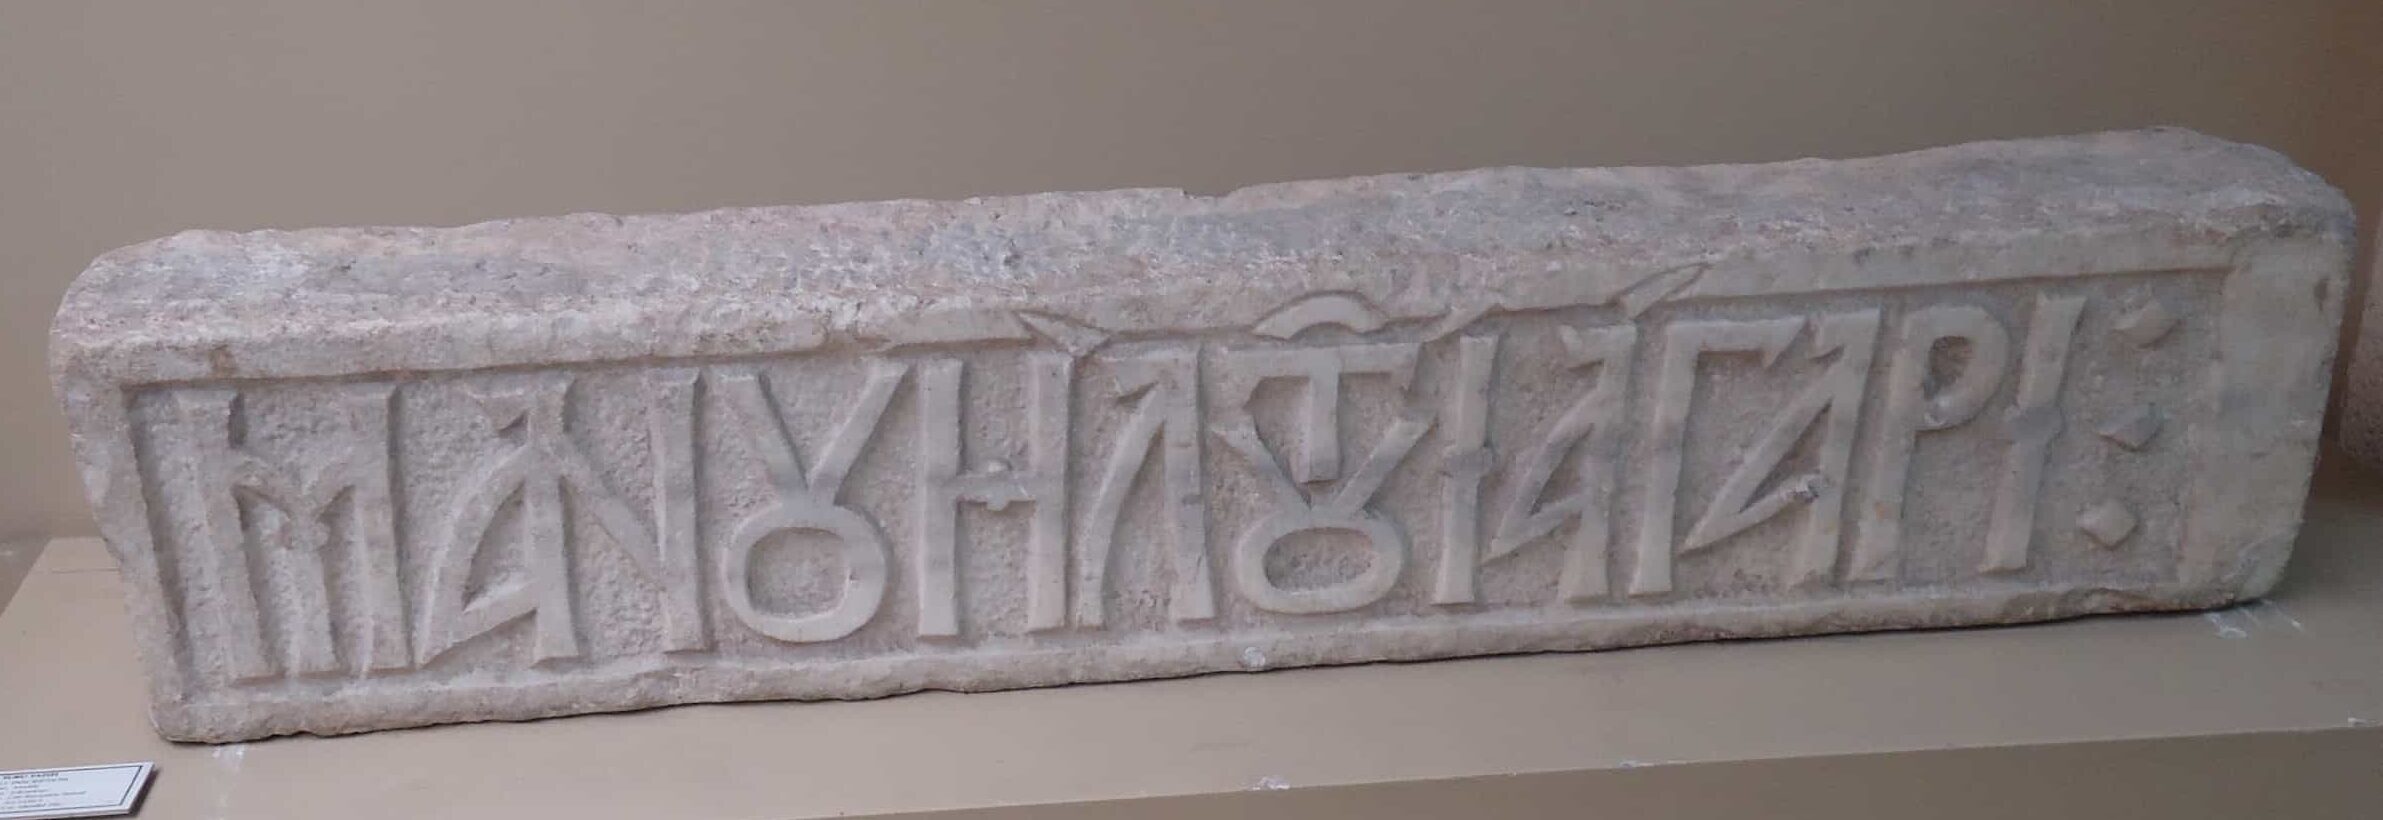 Byzantine inscription at the Istanbul Archaeology Museum in Istanbul, Turkey